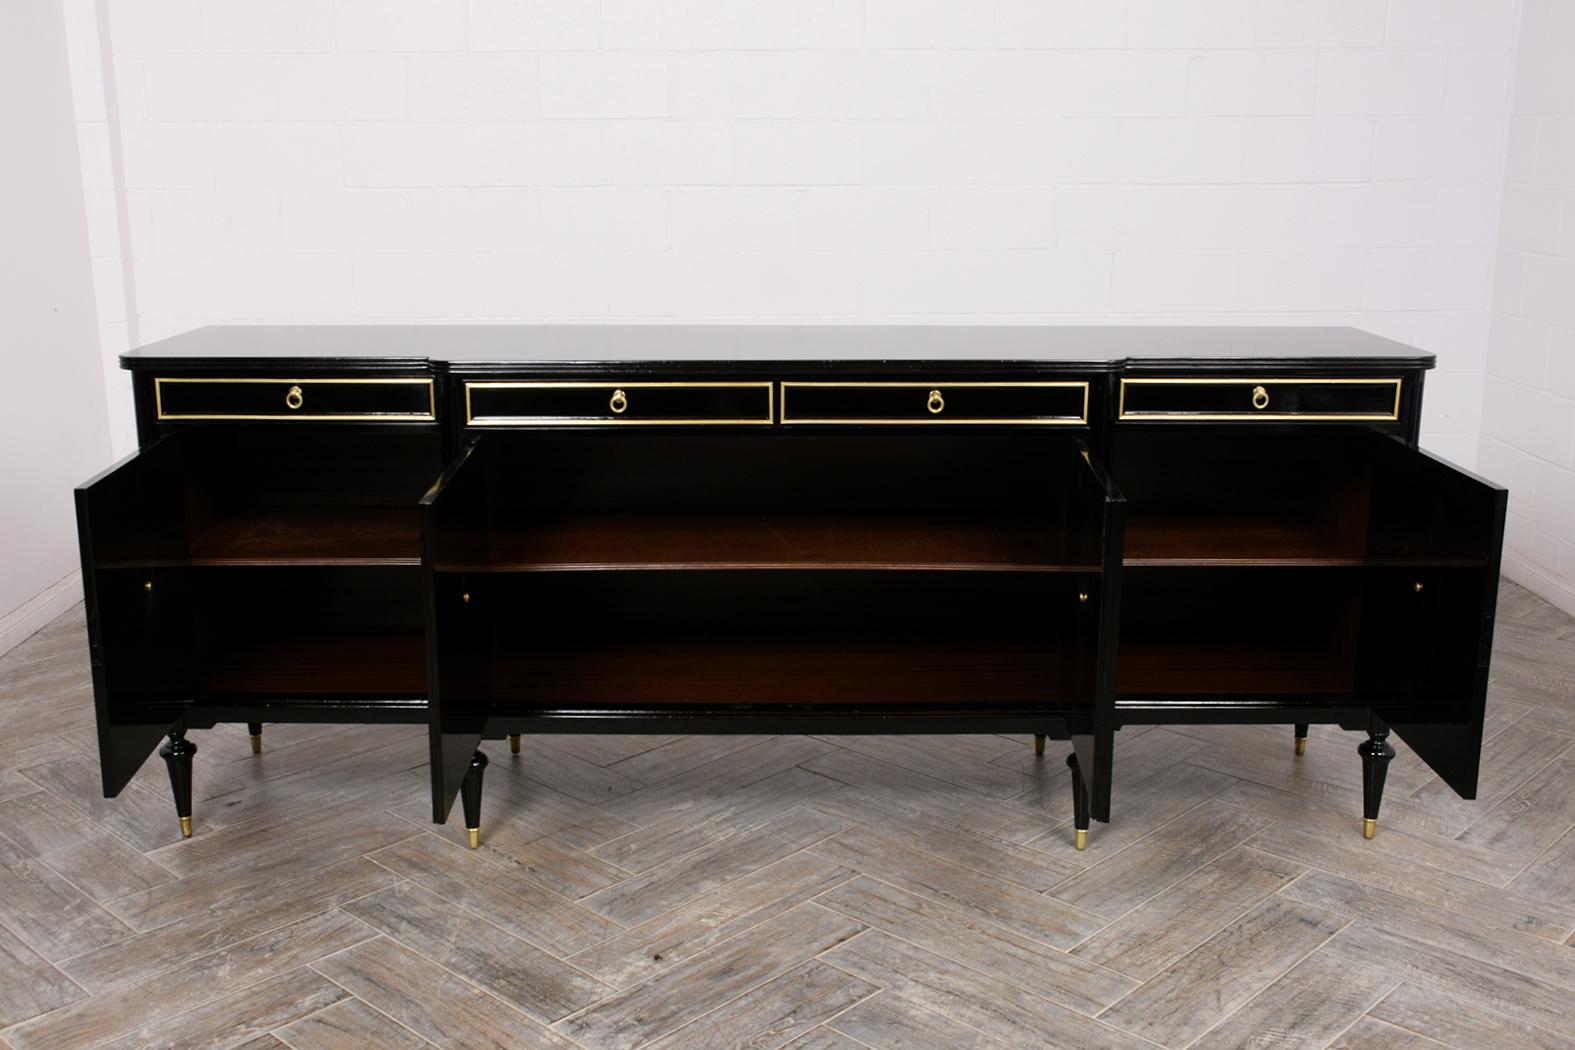 20th Century Regency Style Buffet with Lacquered Finished, circa 1950s